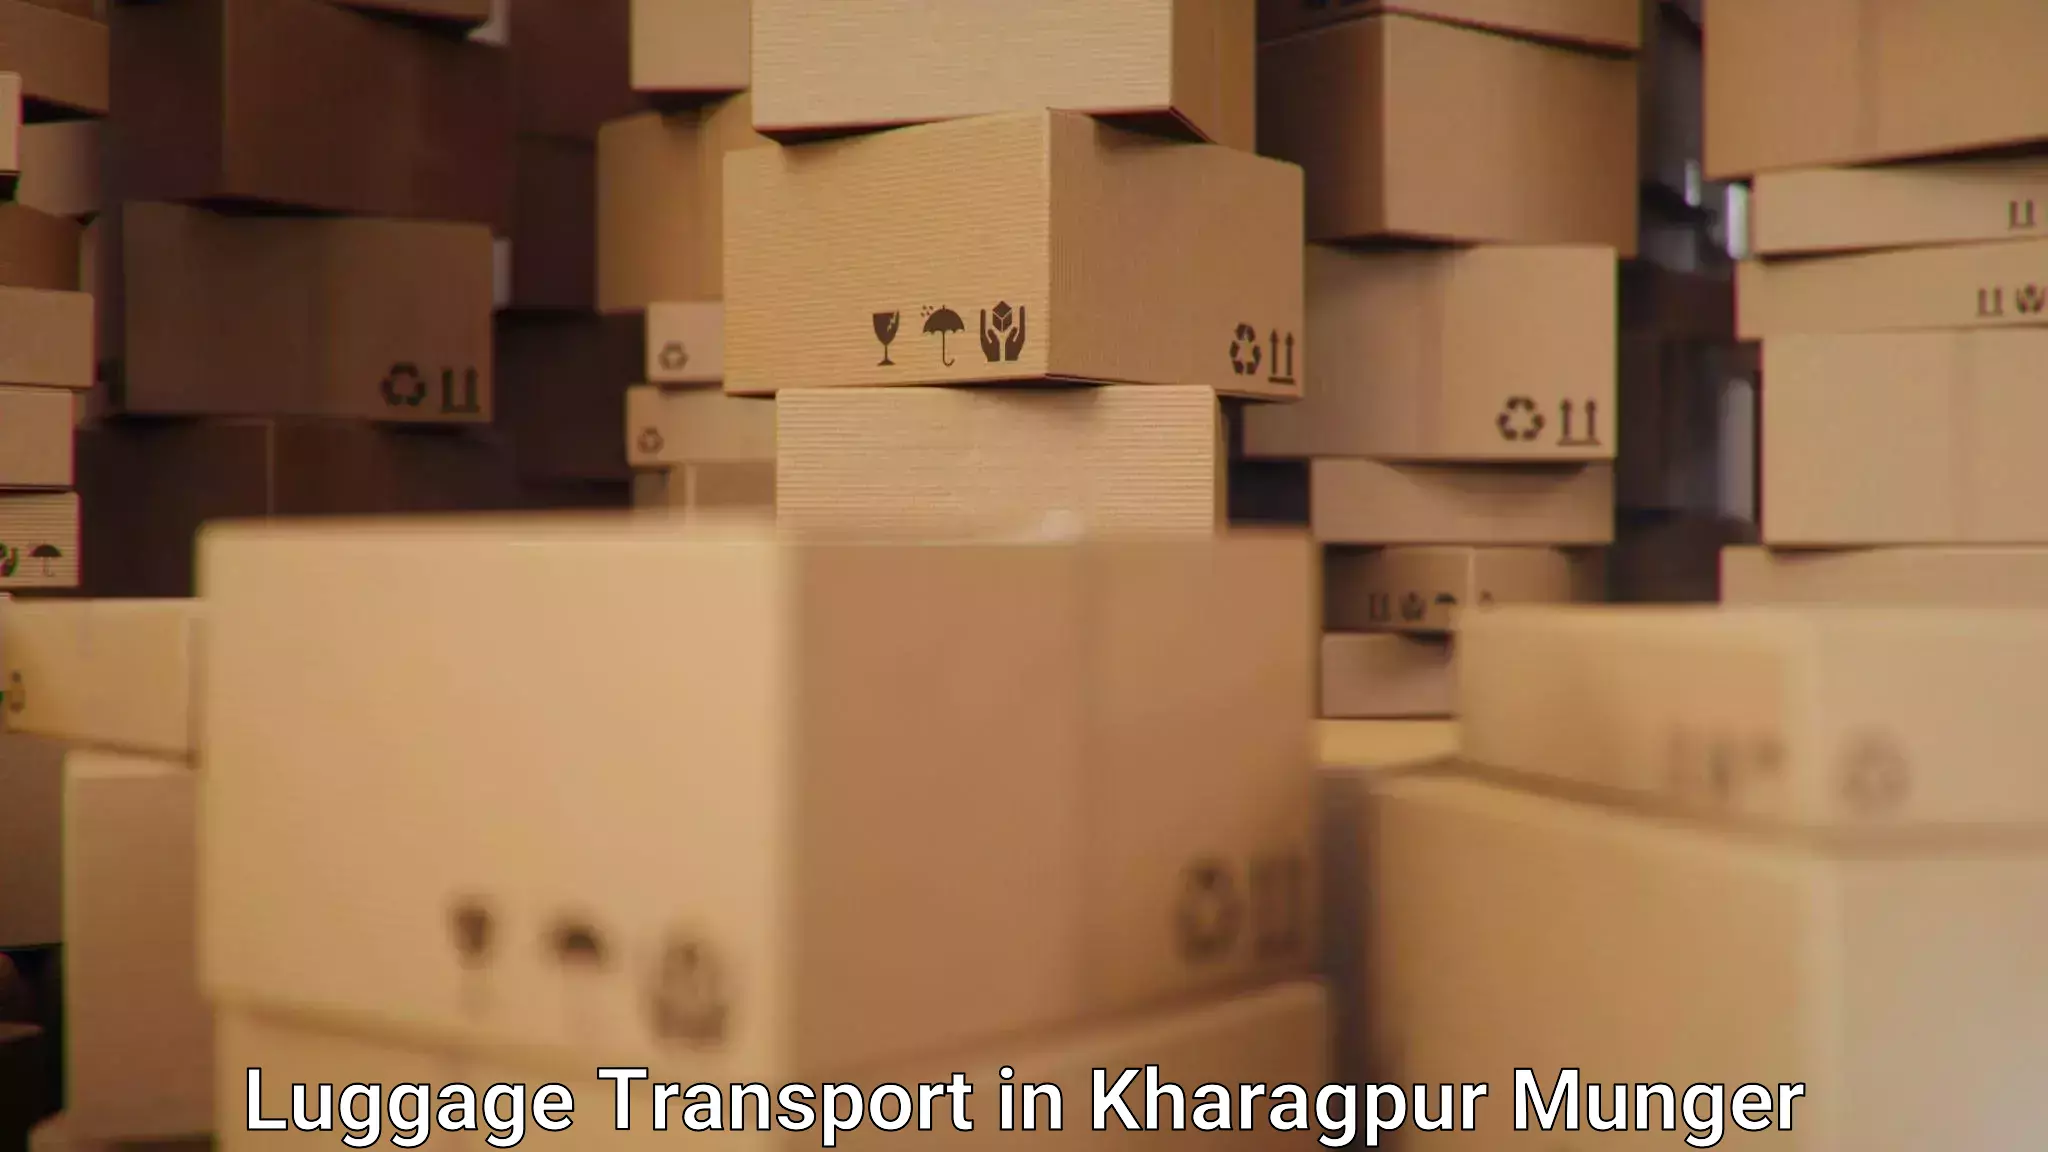 Efficient luggage delivery in Kharagpur Munger